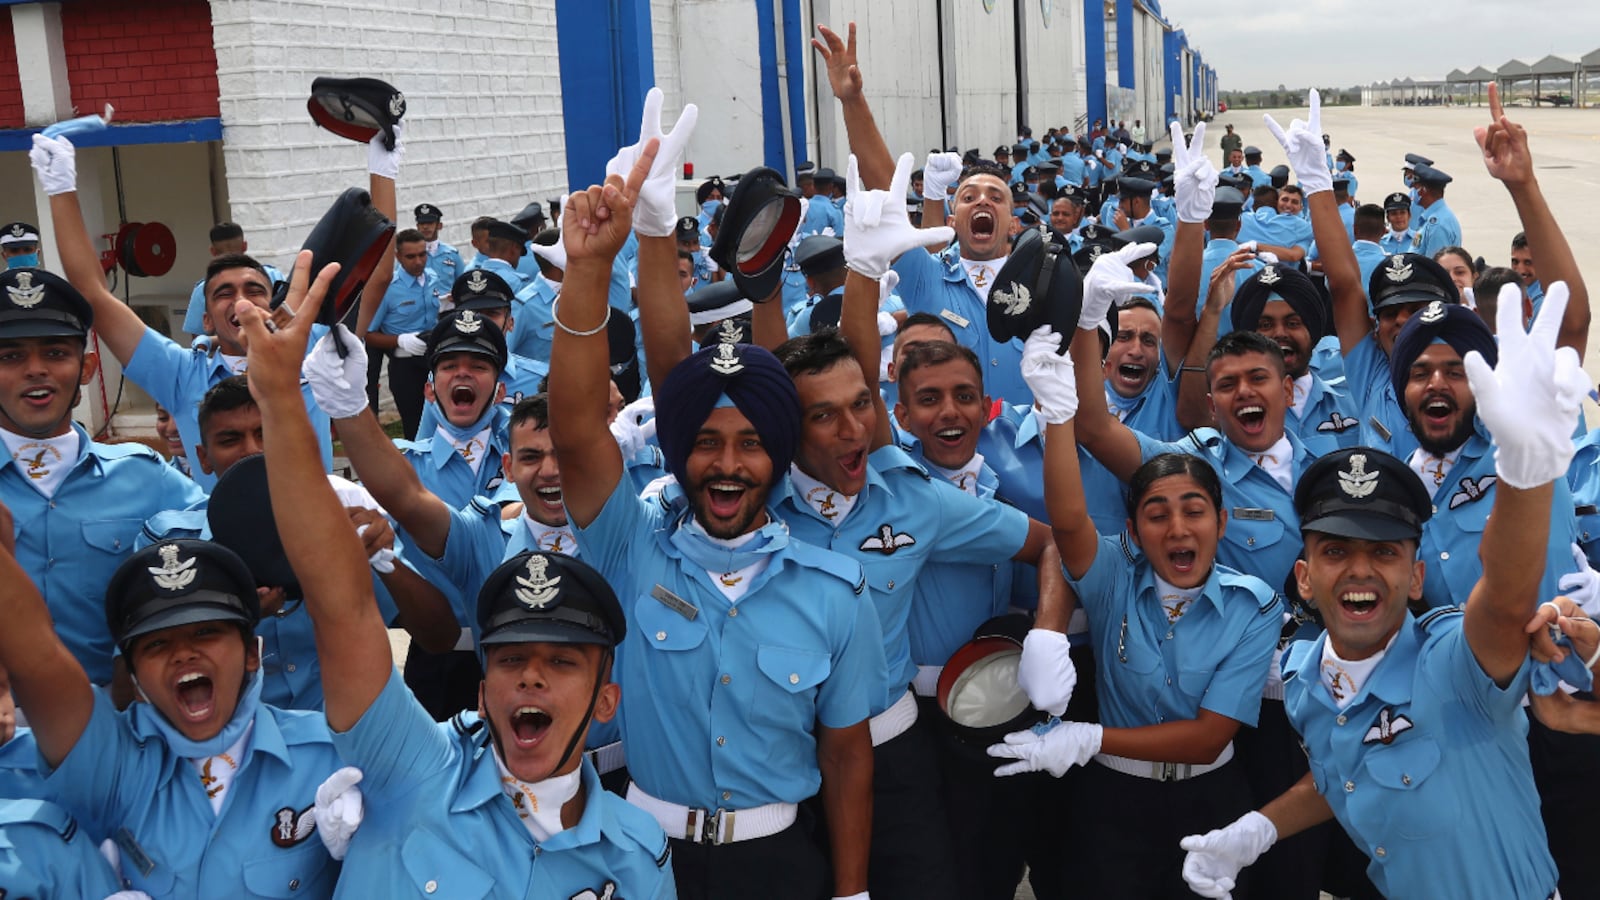 In Pics | 161 IAF flight cadets graduate from Air Force Academy